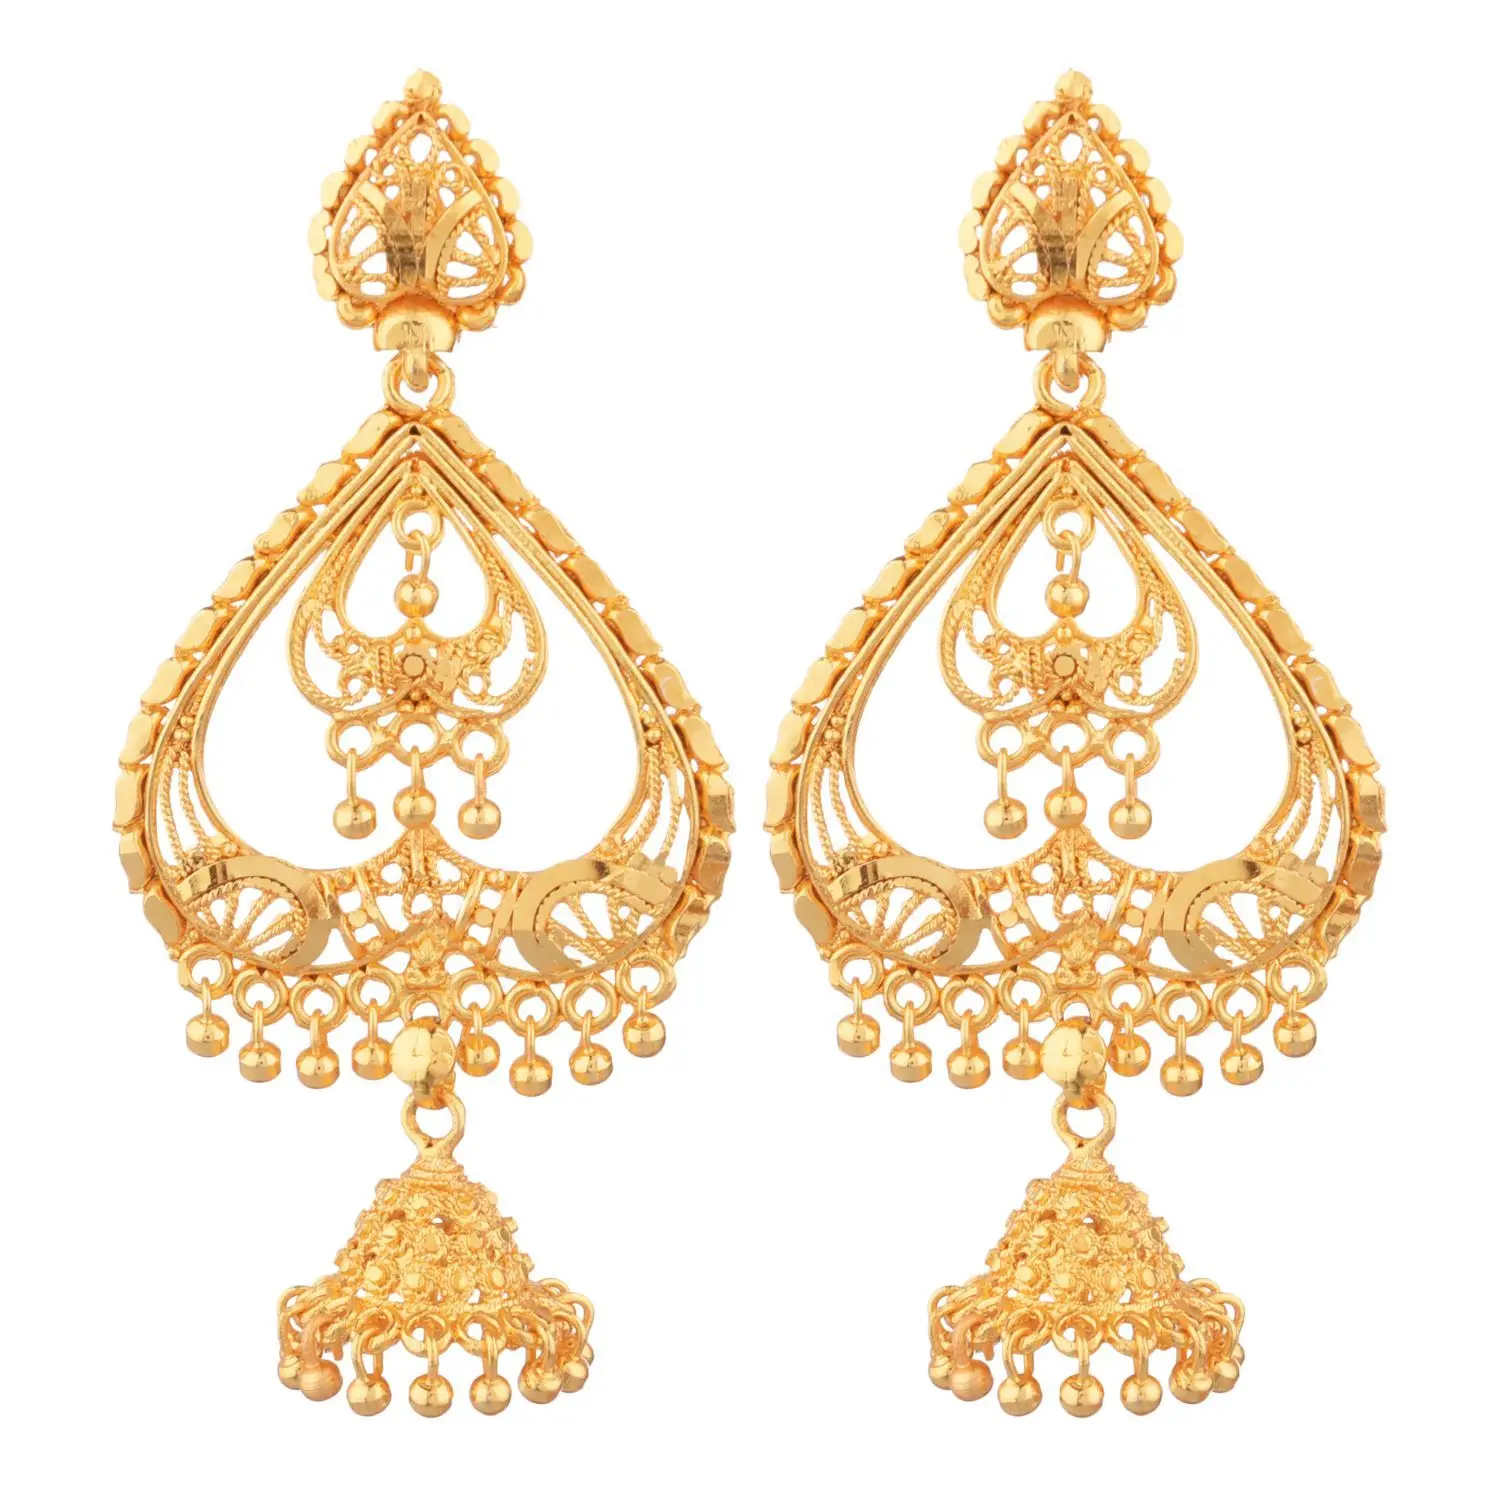 Bollywood Bridal Goldplated Earrings Indian Traditional Dangle Fashion Jewellery 